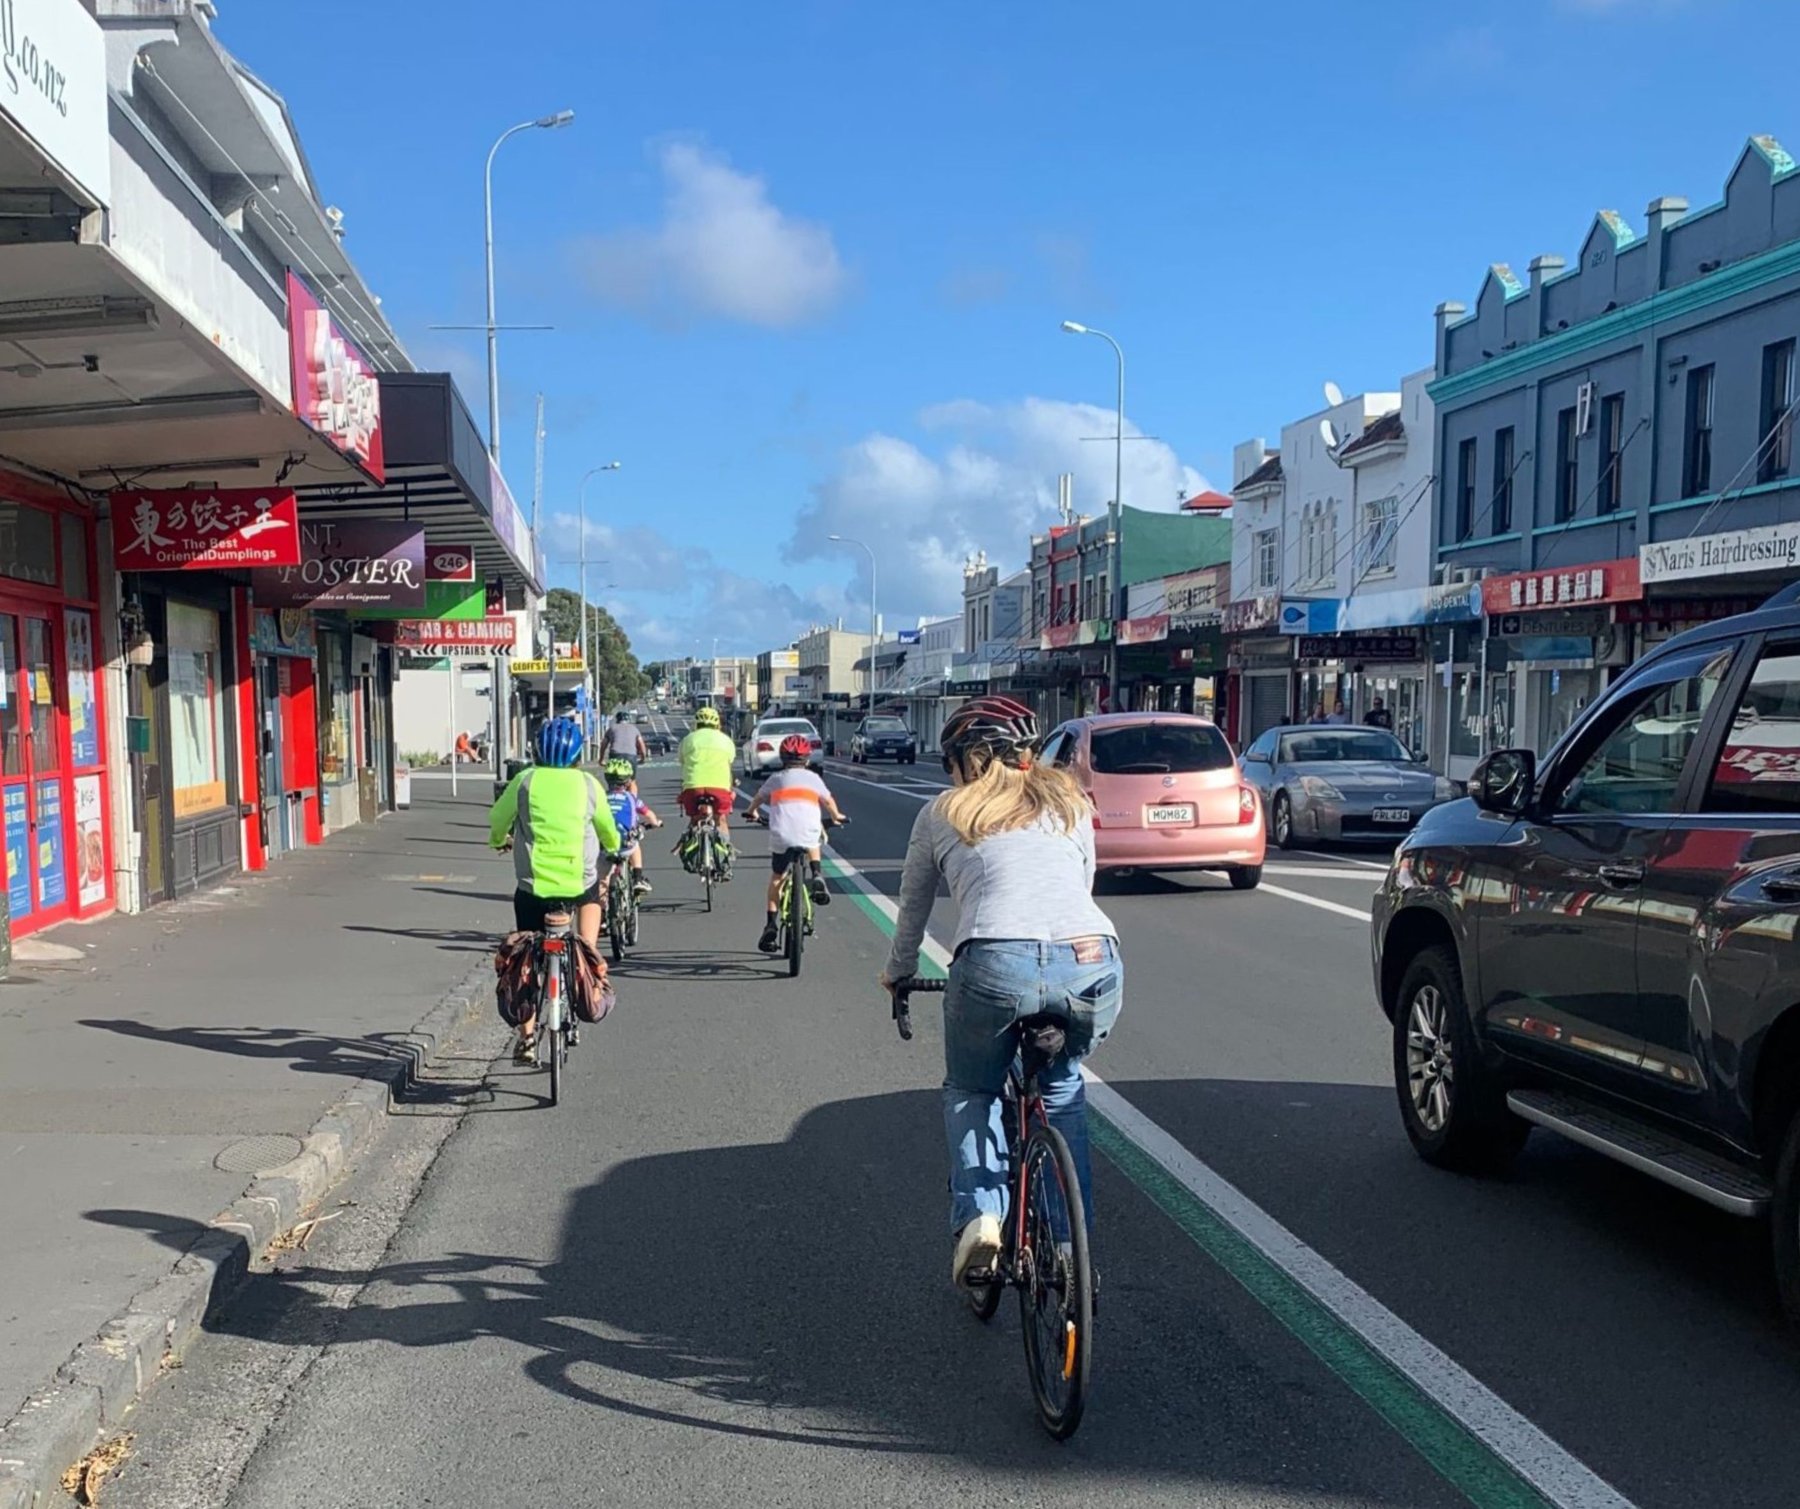 adults and kids cycle on a painted cycleway with cars alongside on a busy city street on a sunny day